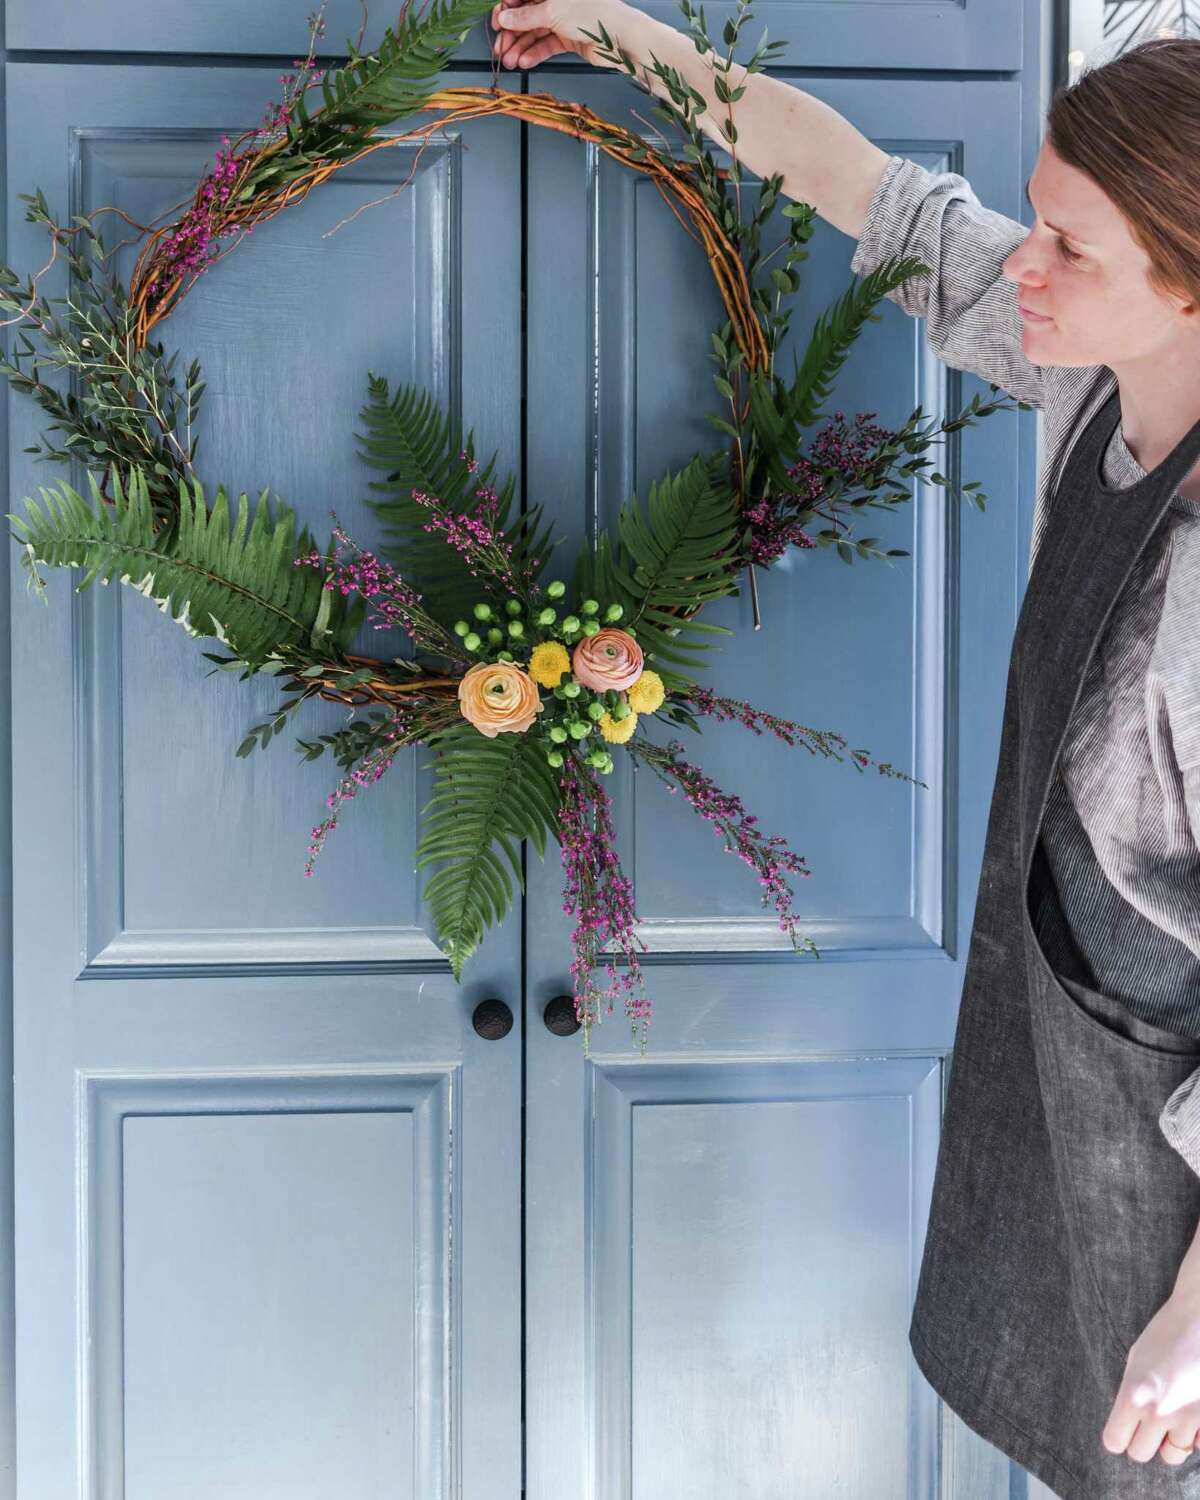 Learn to make a pretty springtime wreath April 7 at The Smithy in New Preston.